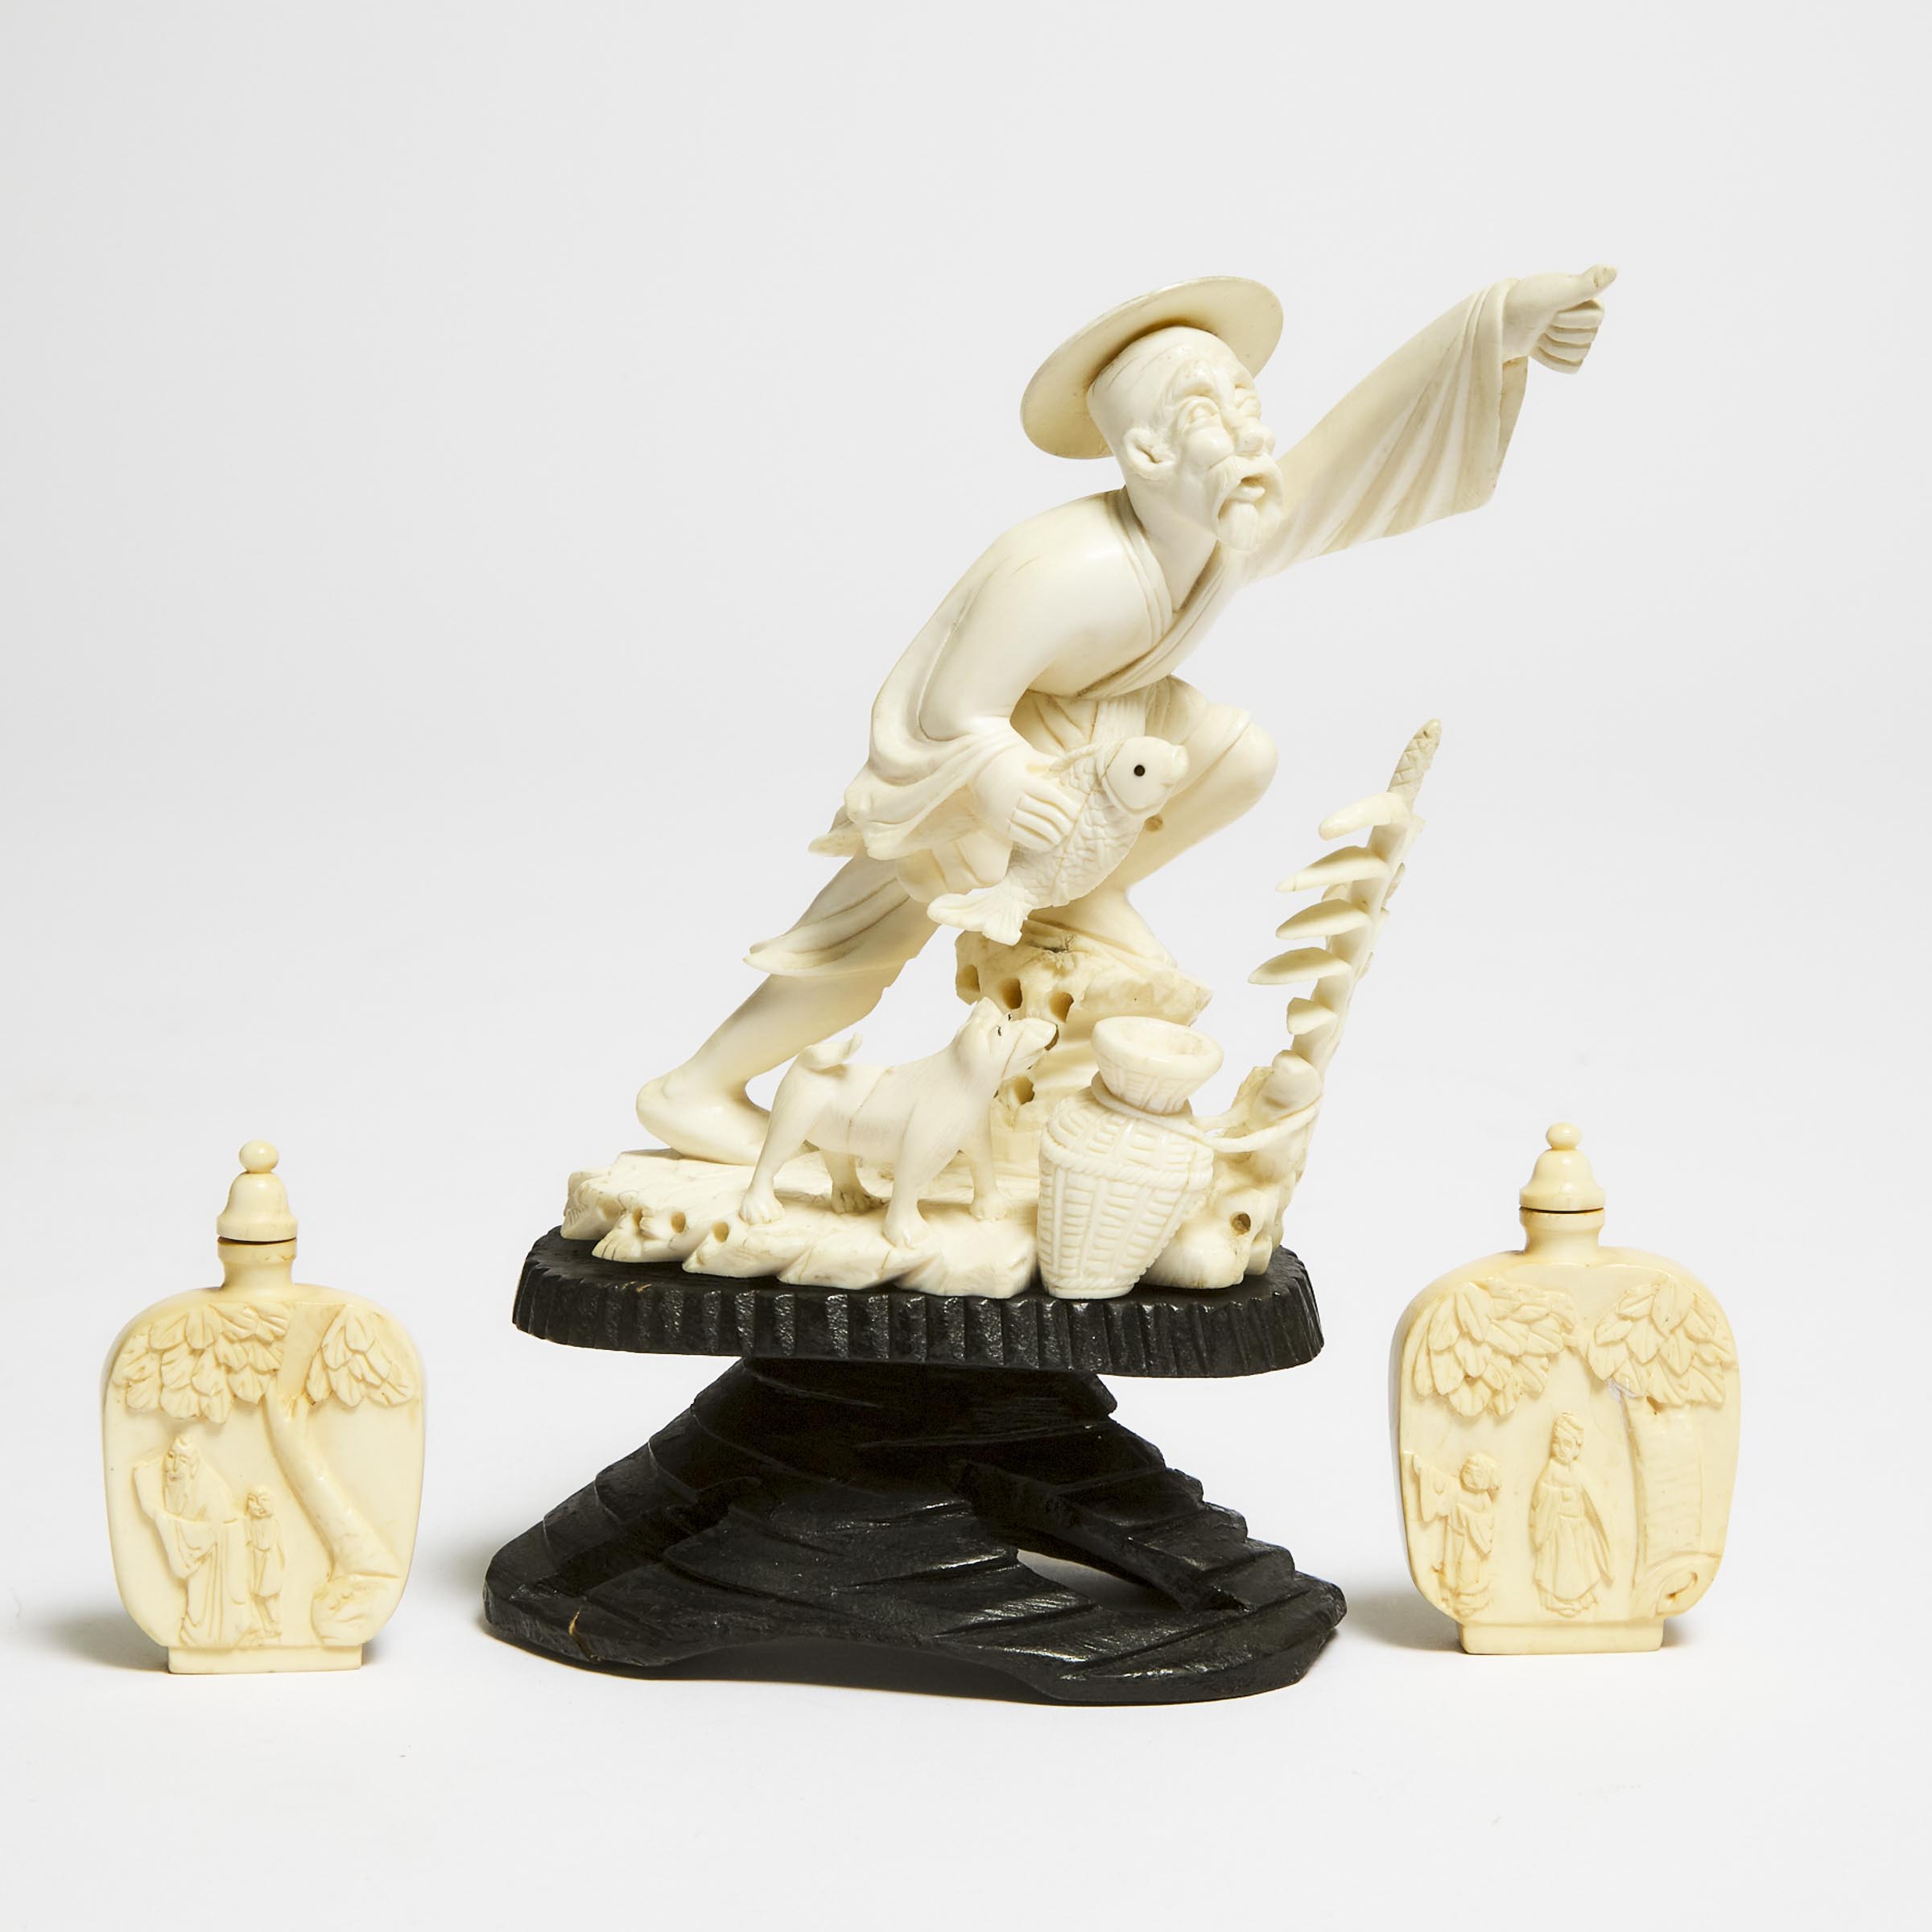 An Ivory Figure of a Fisherman, Together With Two Ivory Snuff Bottles, Mid 20th Century